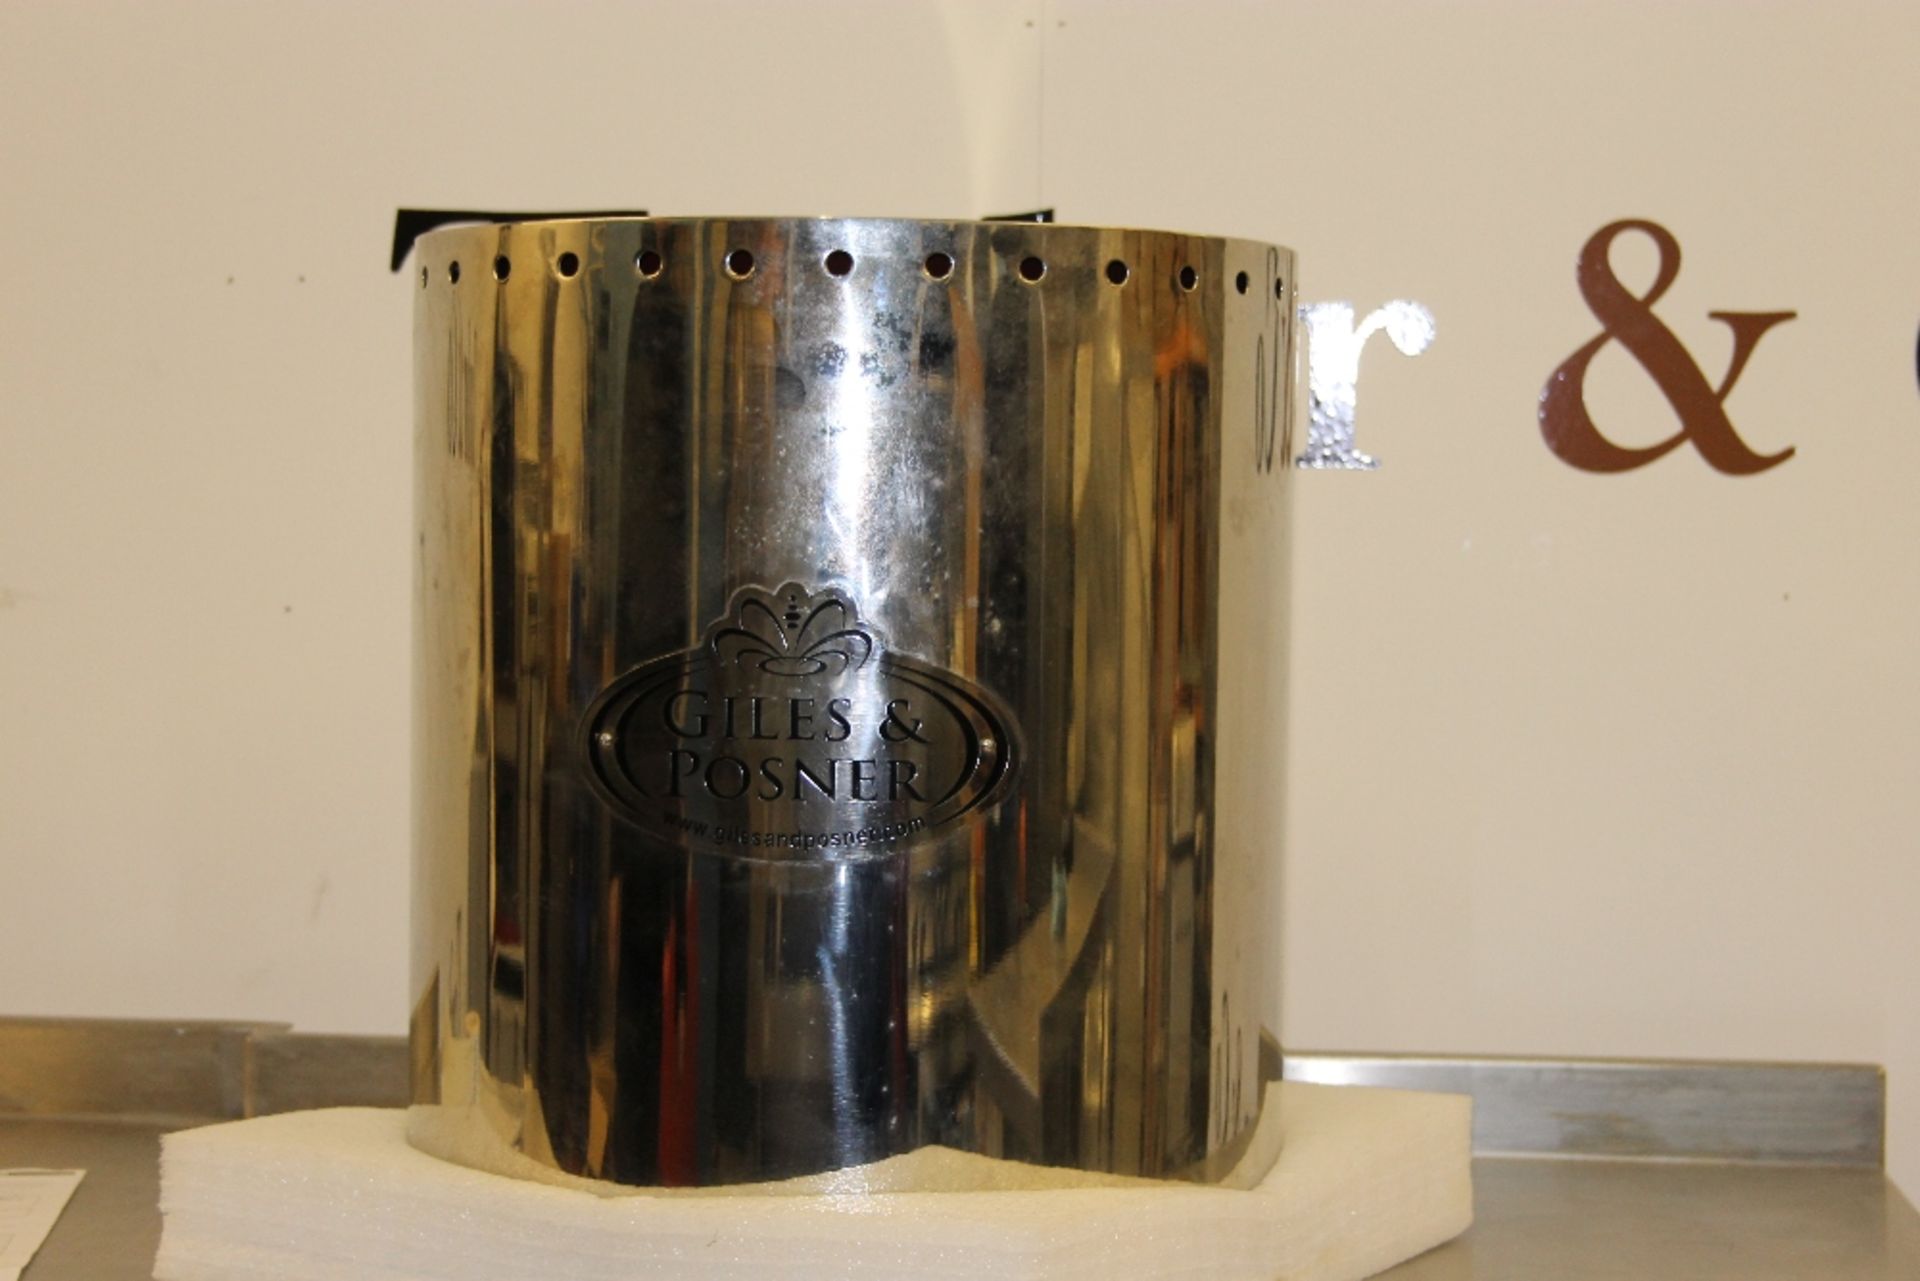 Superb As New Chocolate Fountain by Giles & Posner – Stainless Steel throughout – 1-ph 5 Tiers – - Image 5 of 7